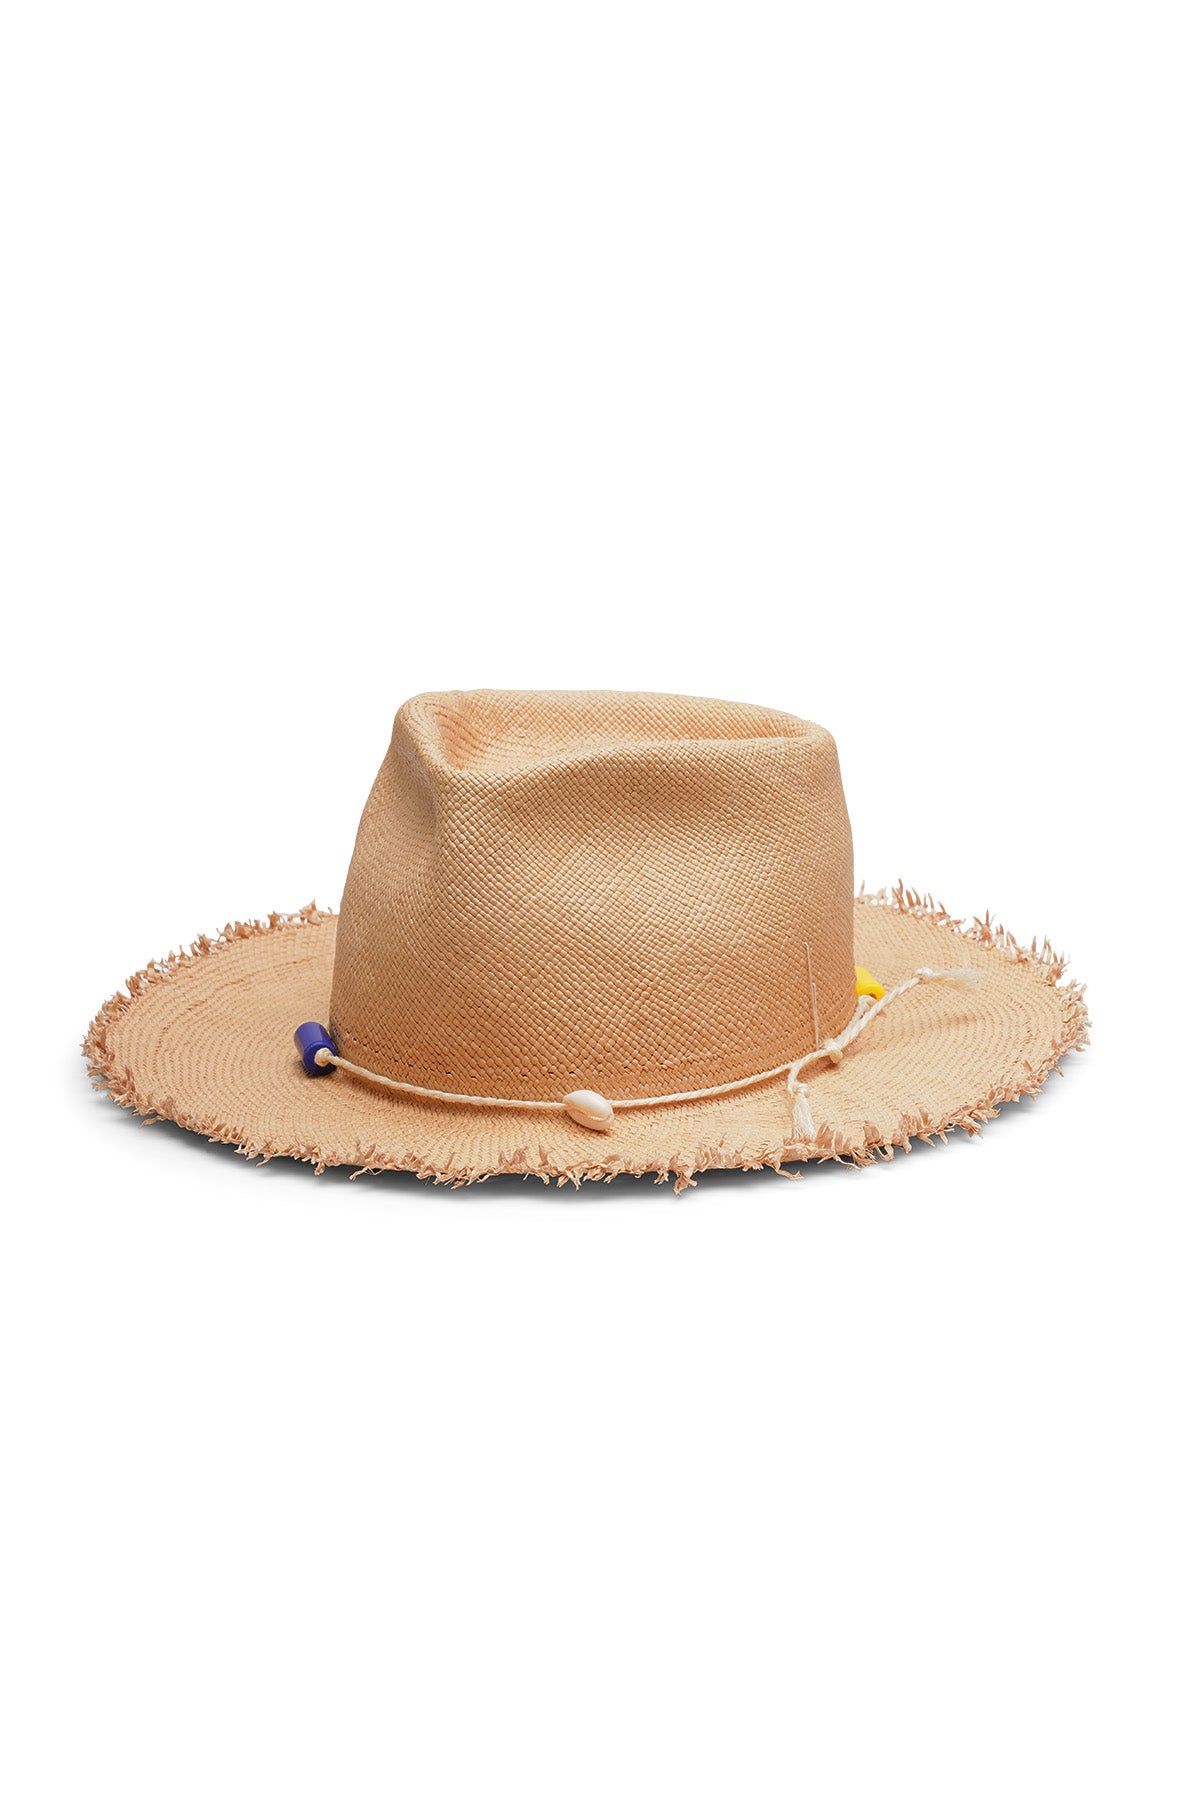 Unisex beige straw fedora with wide frayed brim, teardrop crease, tied rope, beads, and seashell detail, handcrafted by SoonNoon in Stockholm